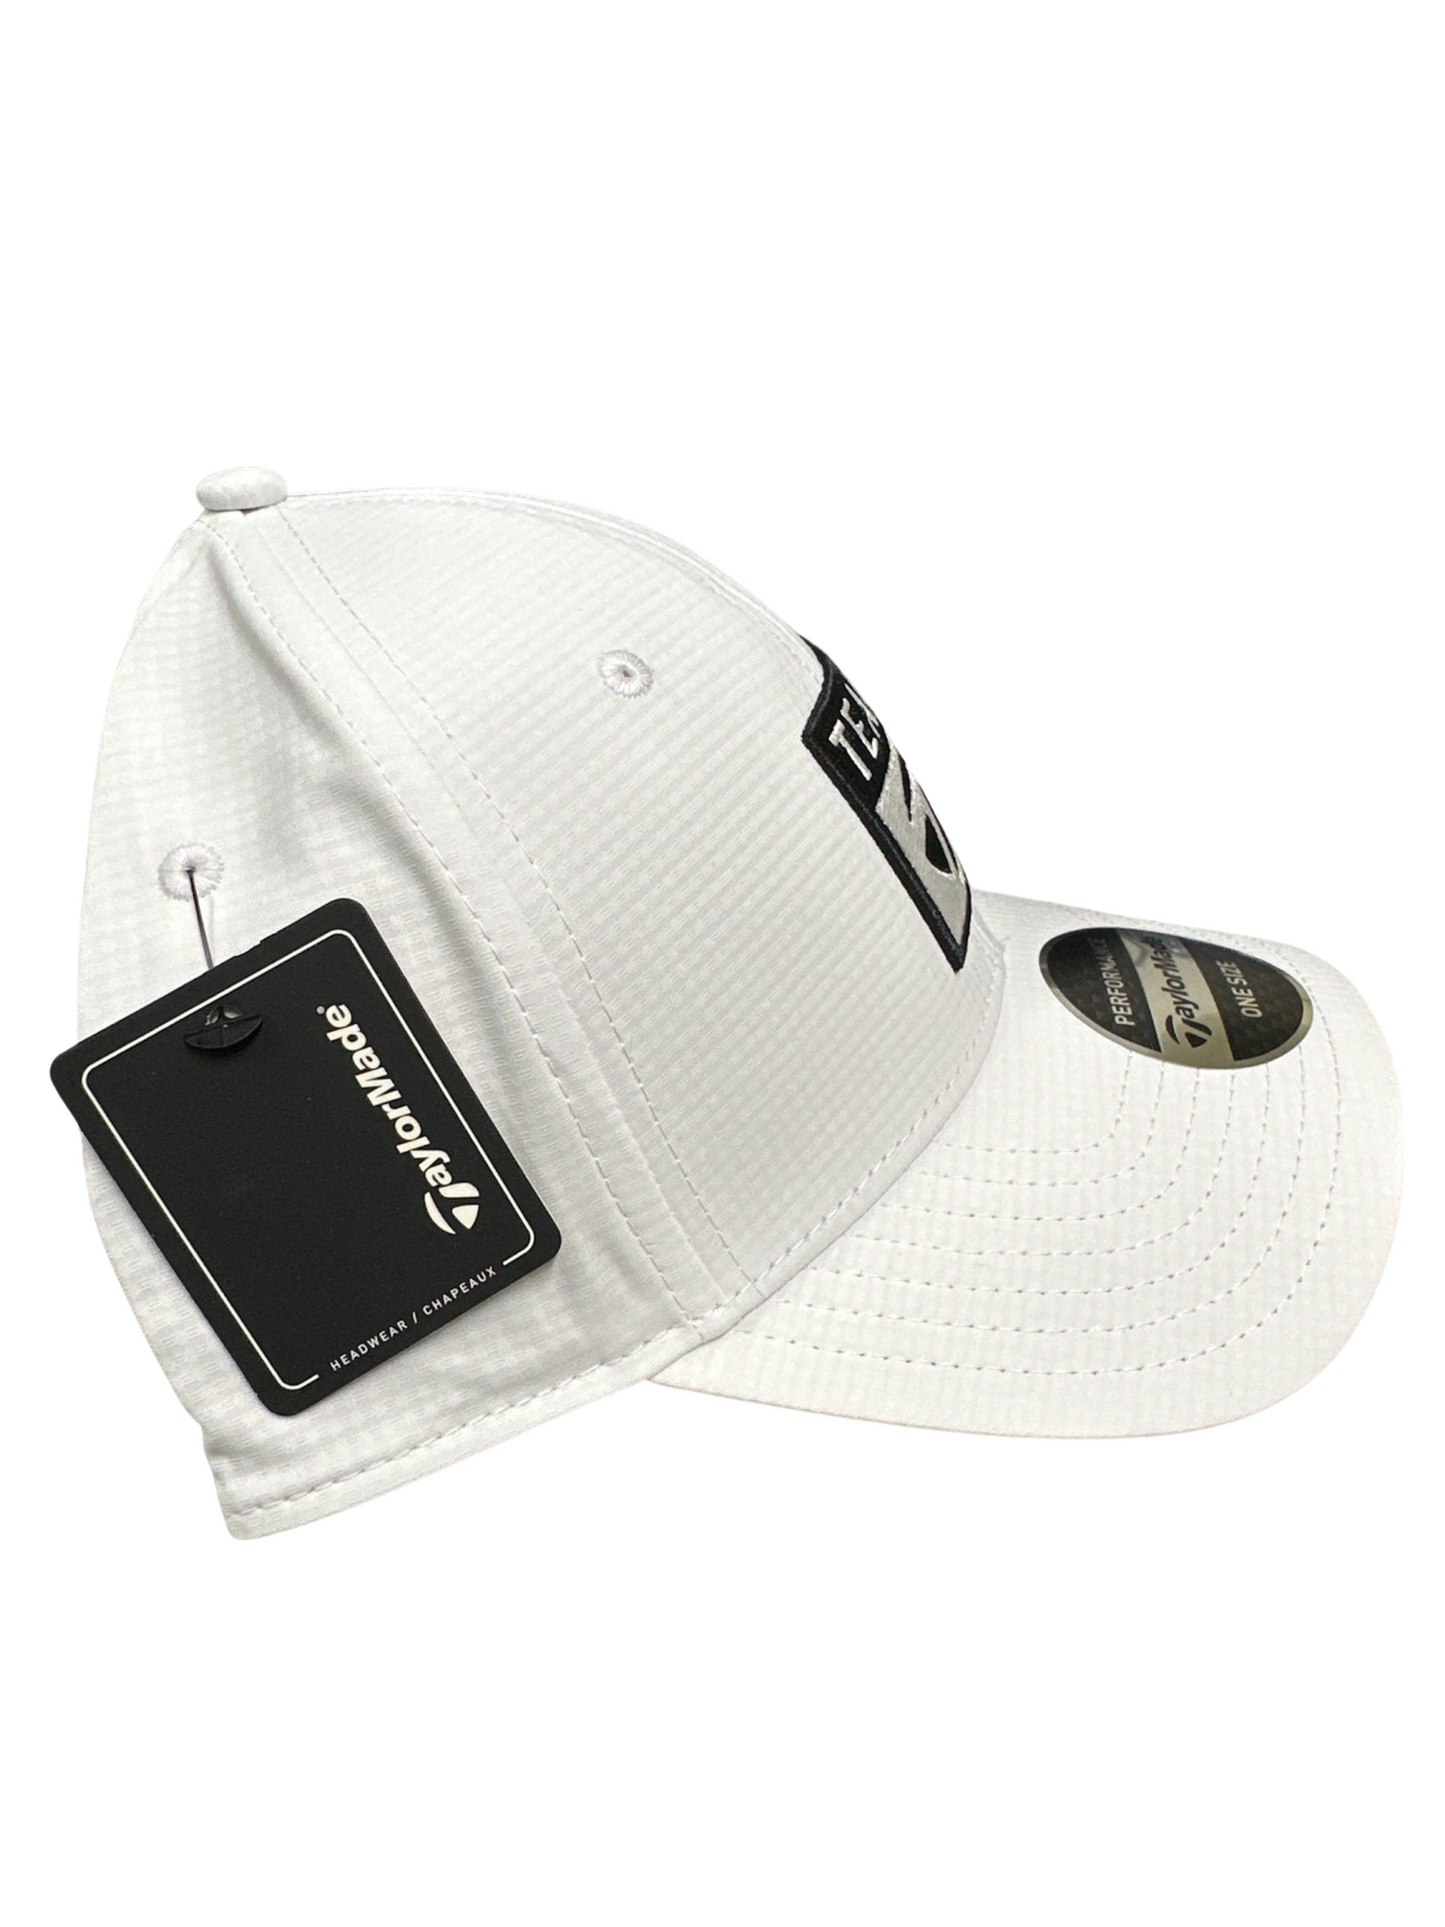 Taylormade Golf Hat - Team T - White